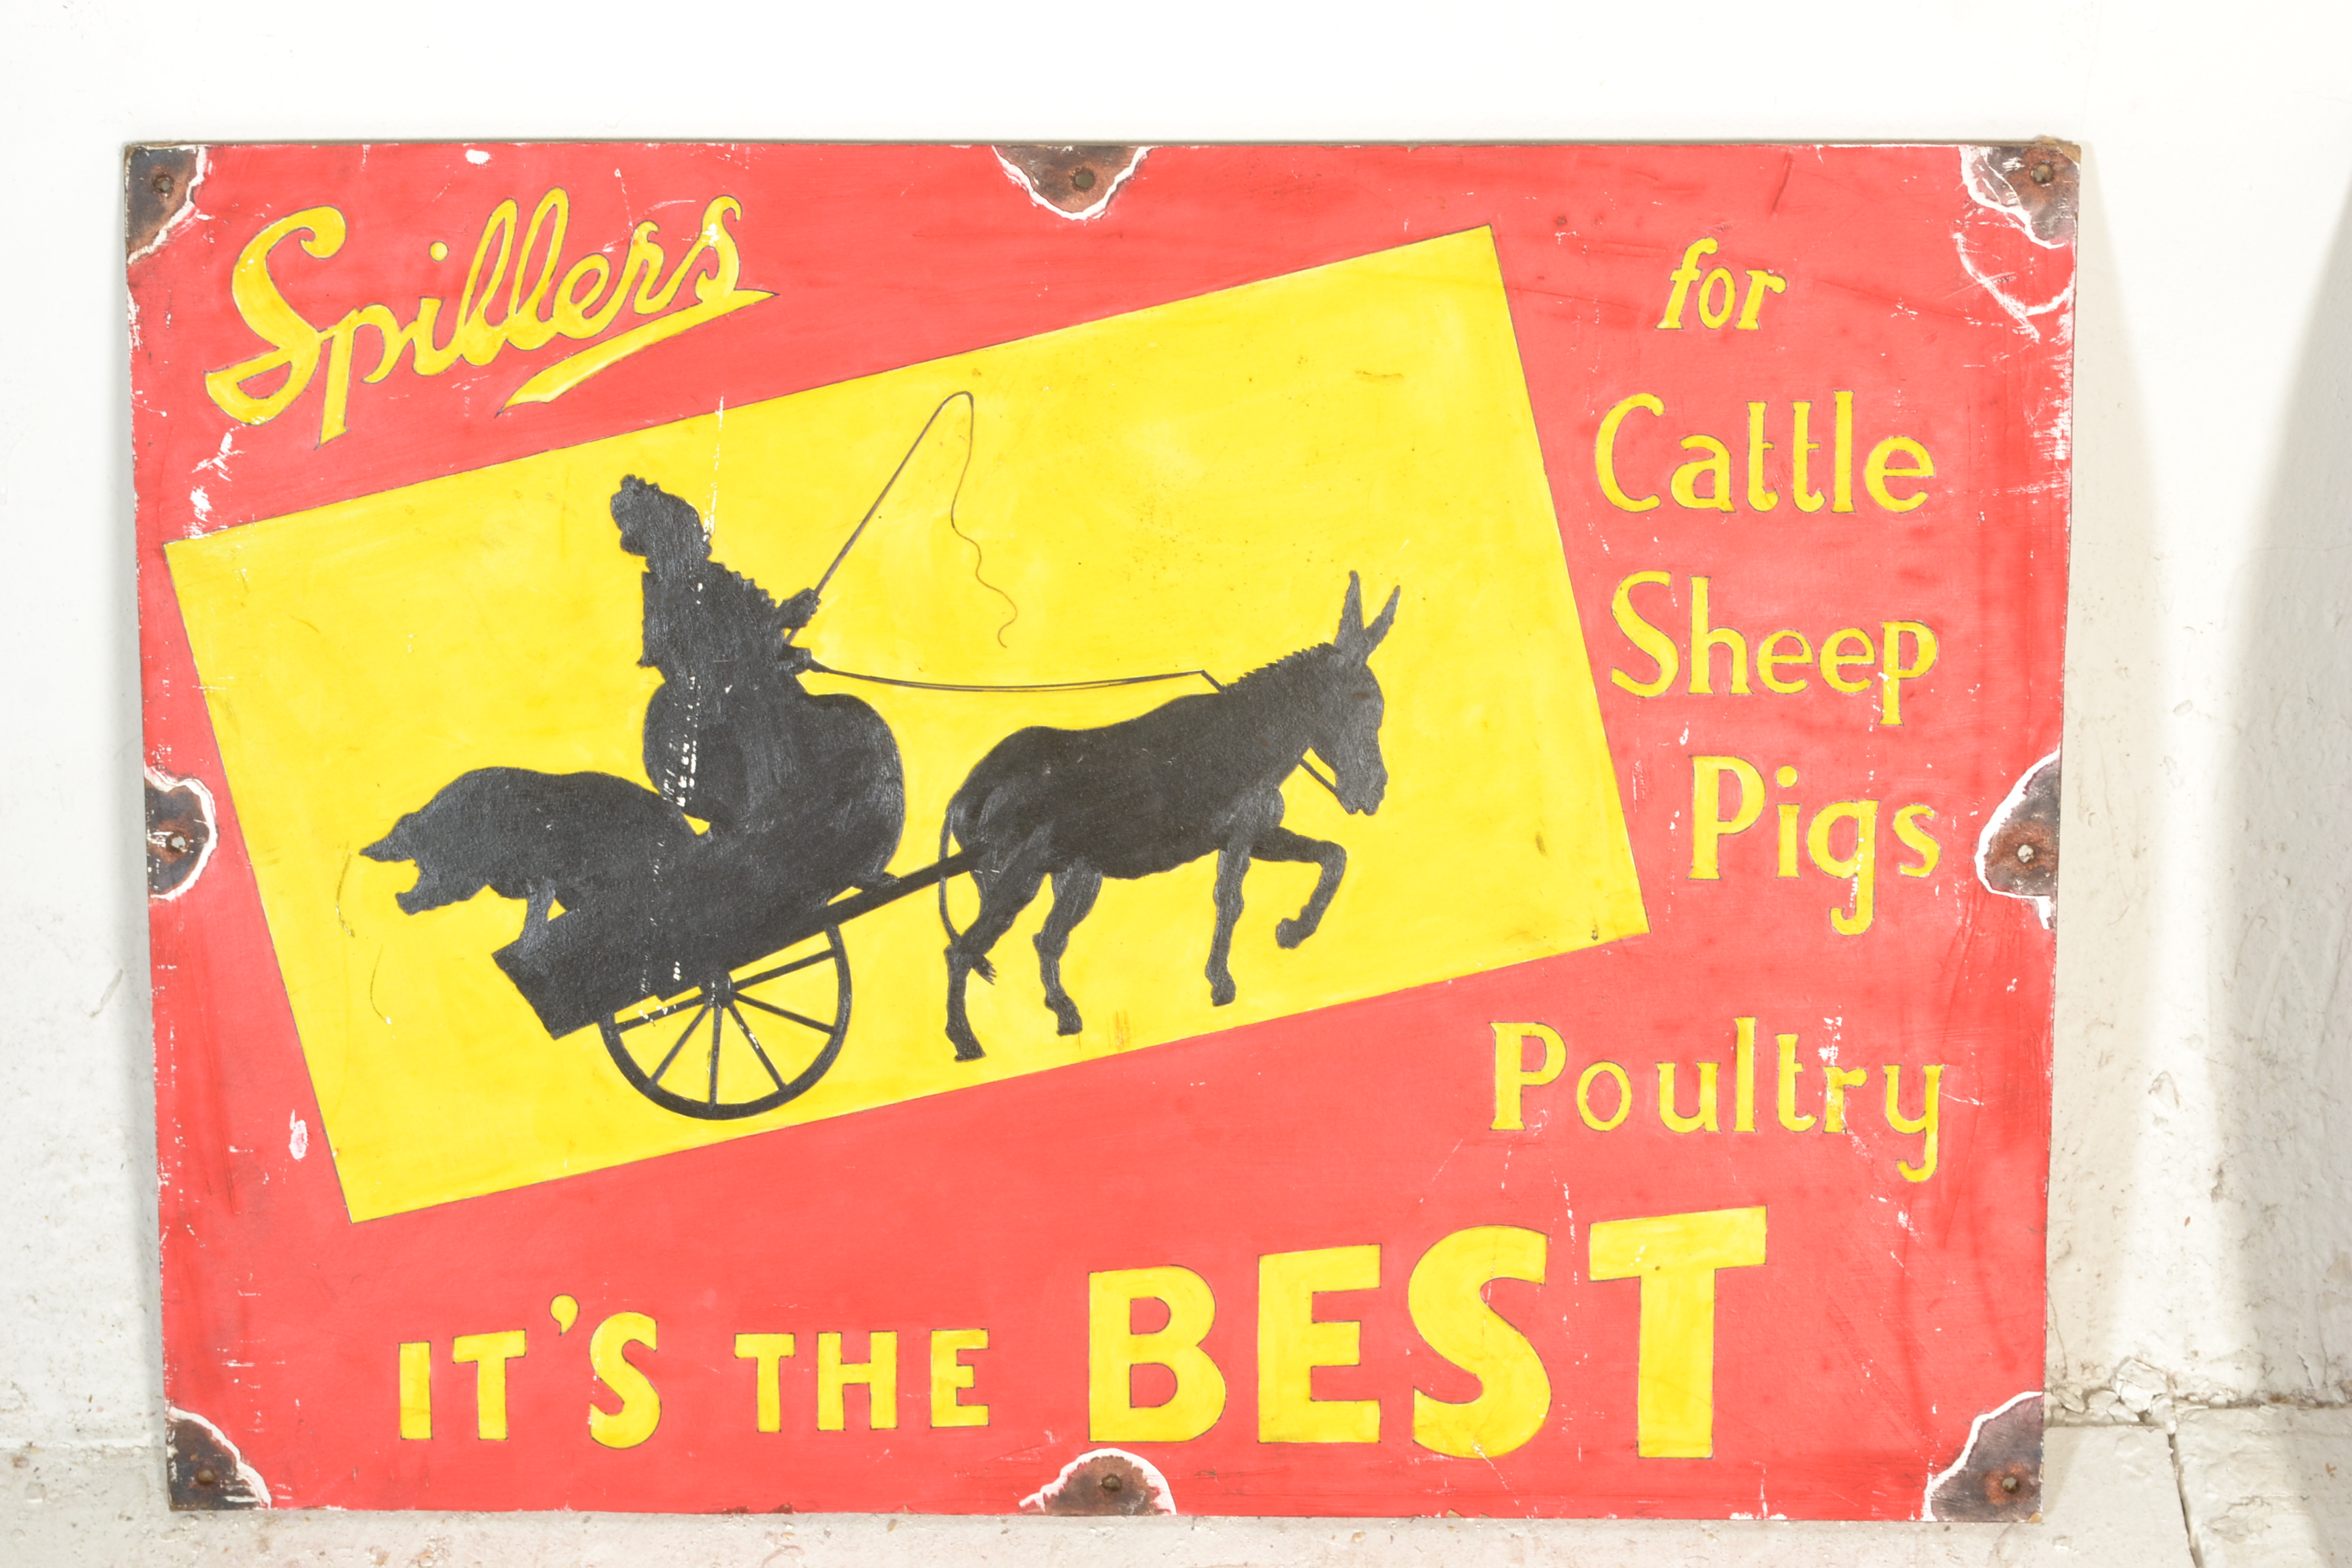 A contemporary artist's impression of a vintage enamel advertising sign on board for Spillers 'For